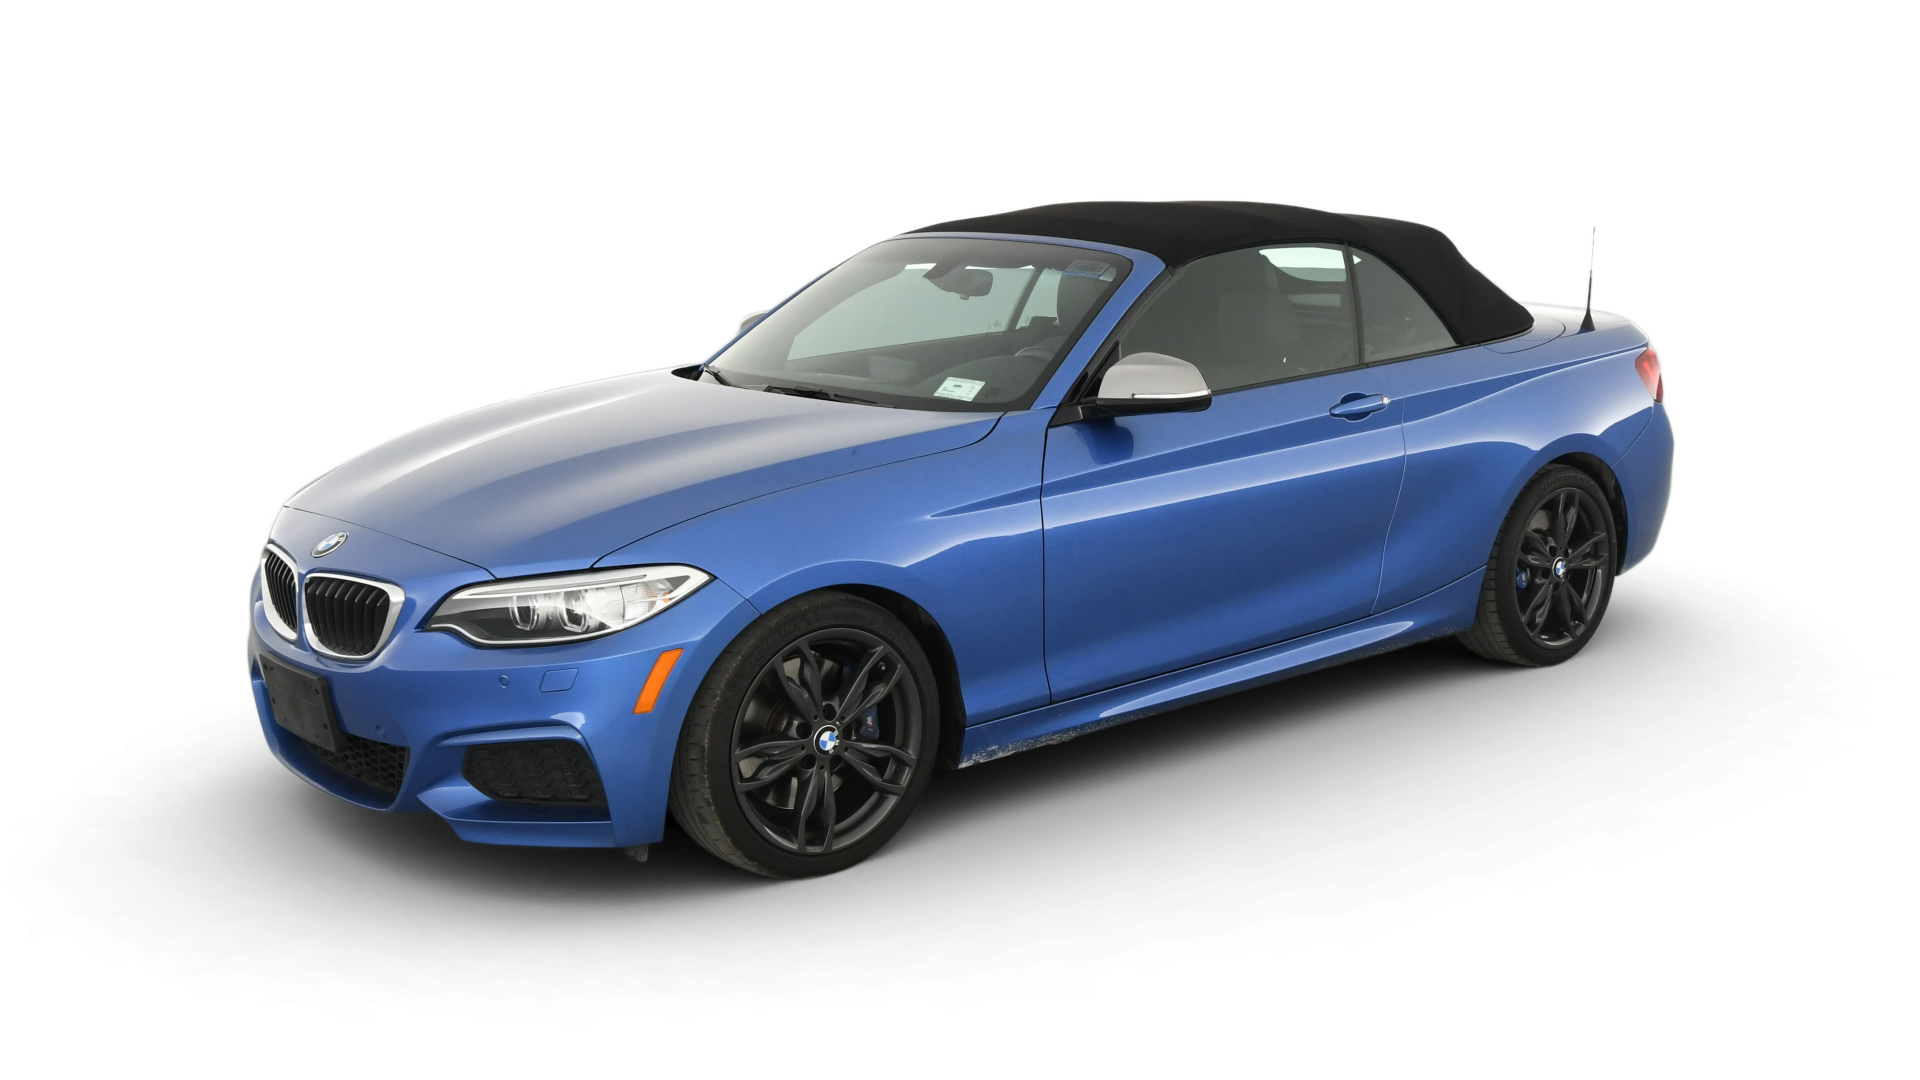 2017 BMW M240i Convertible Review